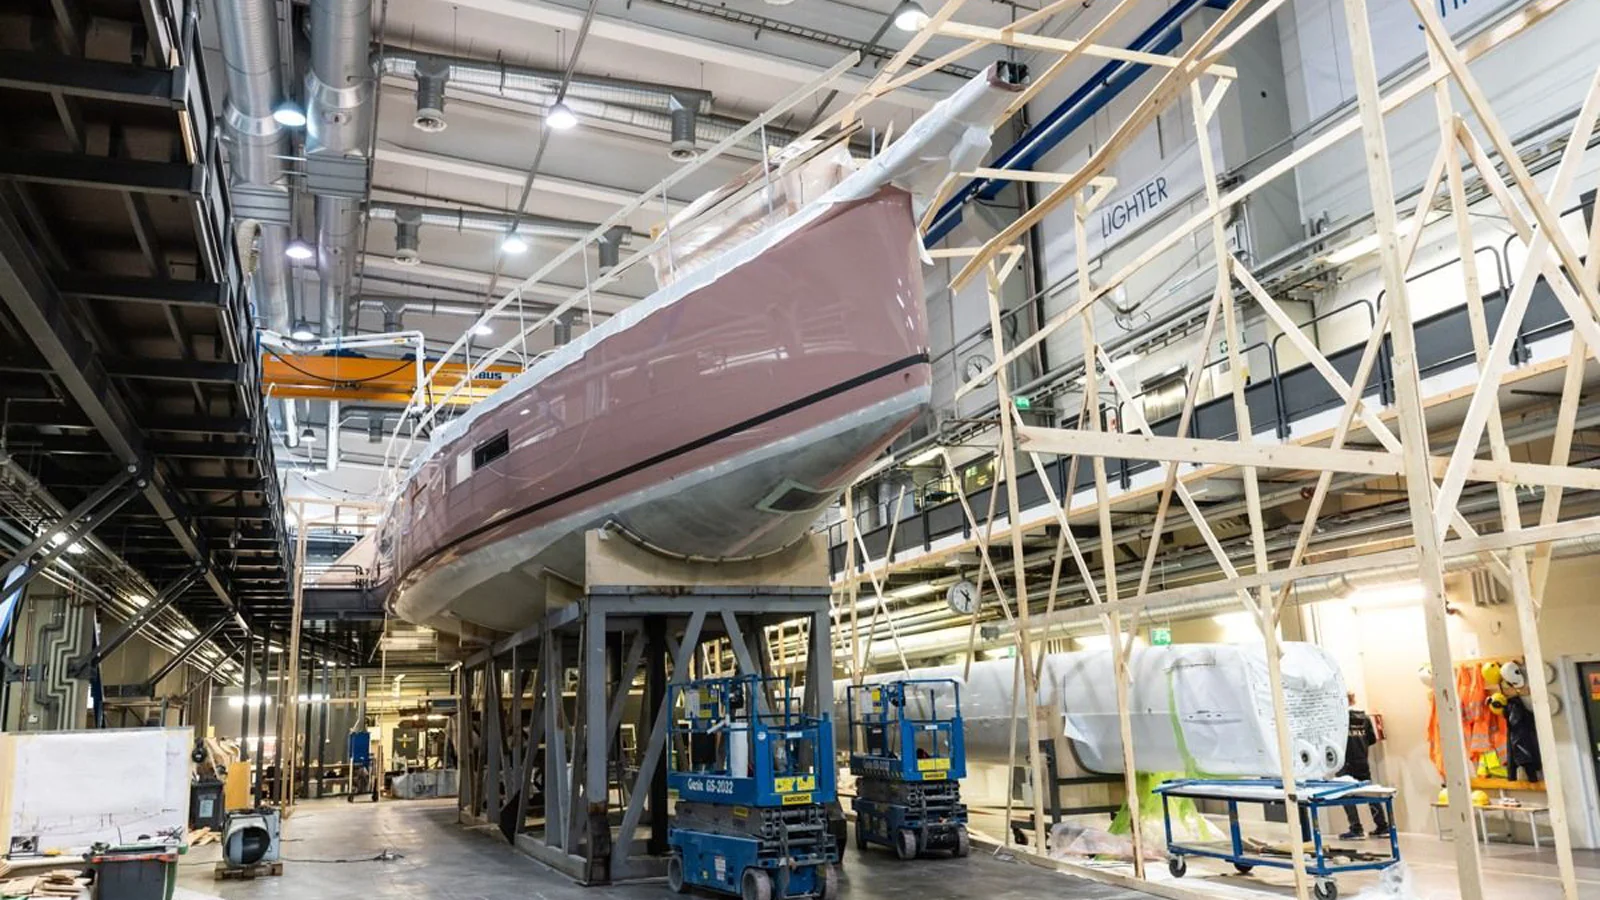 The work on the 23.99-metre sailing yacht has now entered the final stage